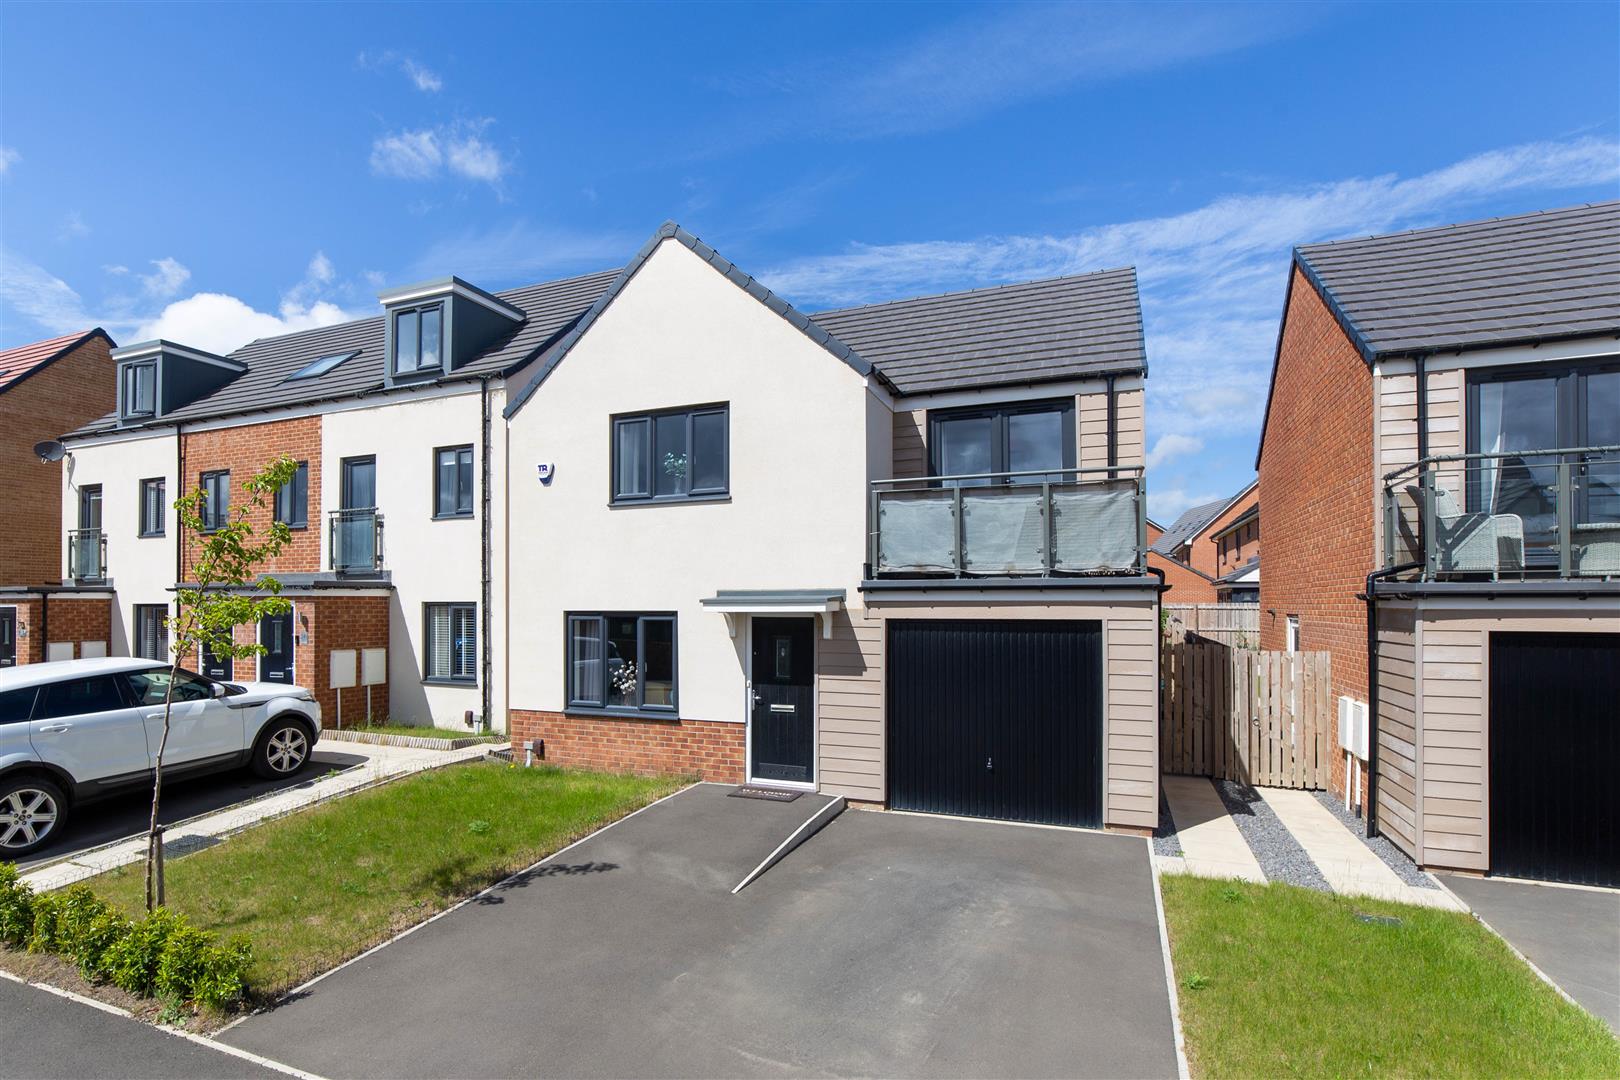 4 bed detached house for sale in Gatekeeper Close, Great Park, NE13